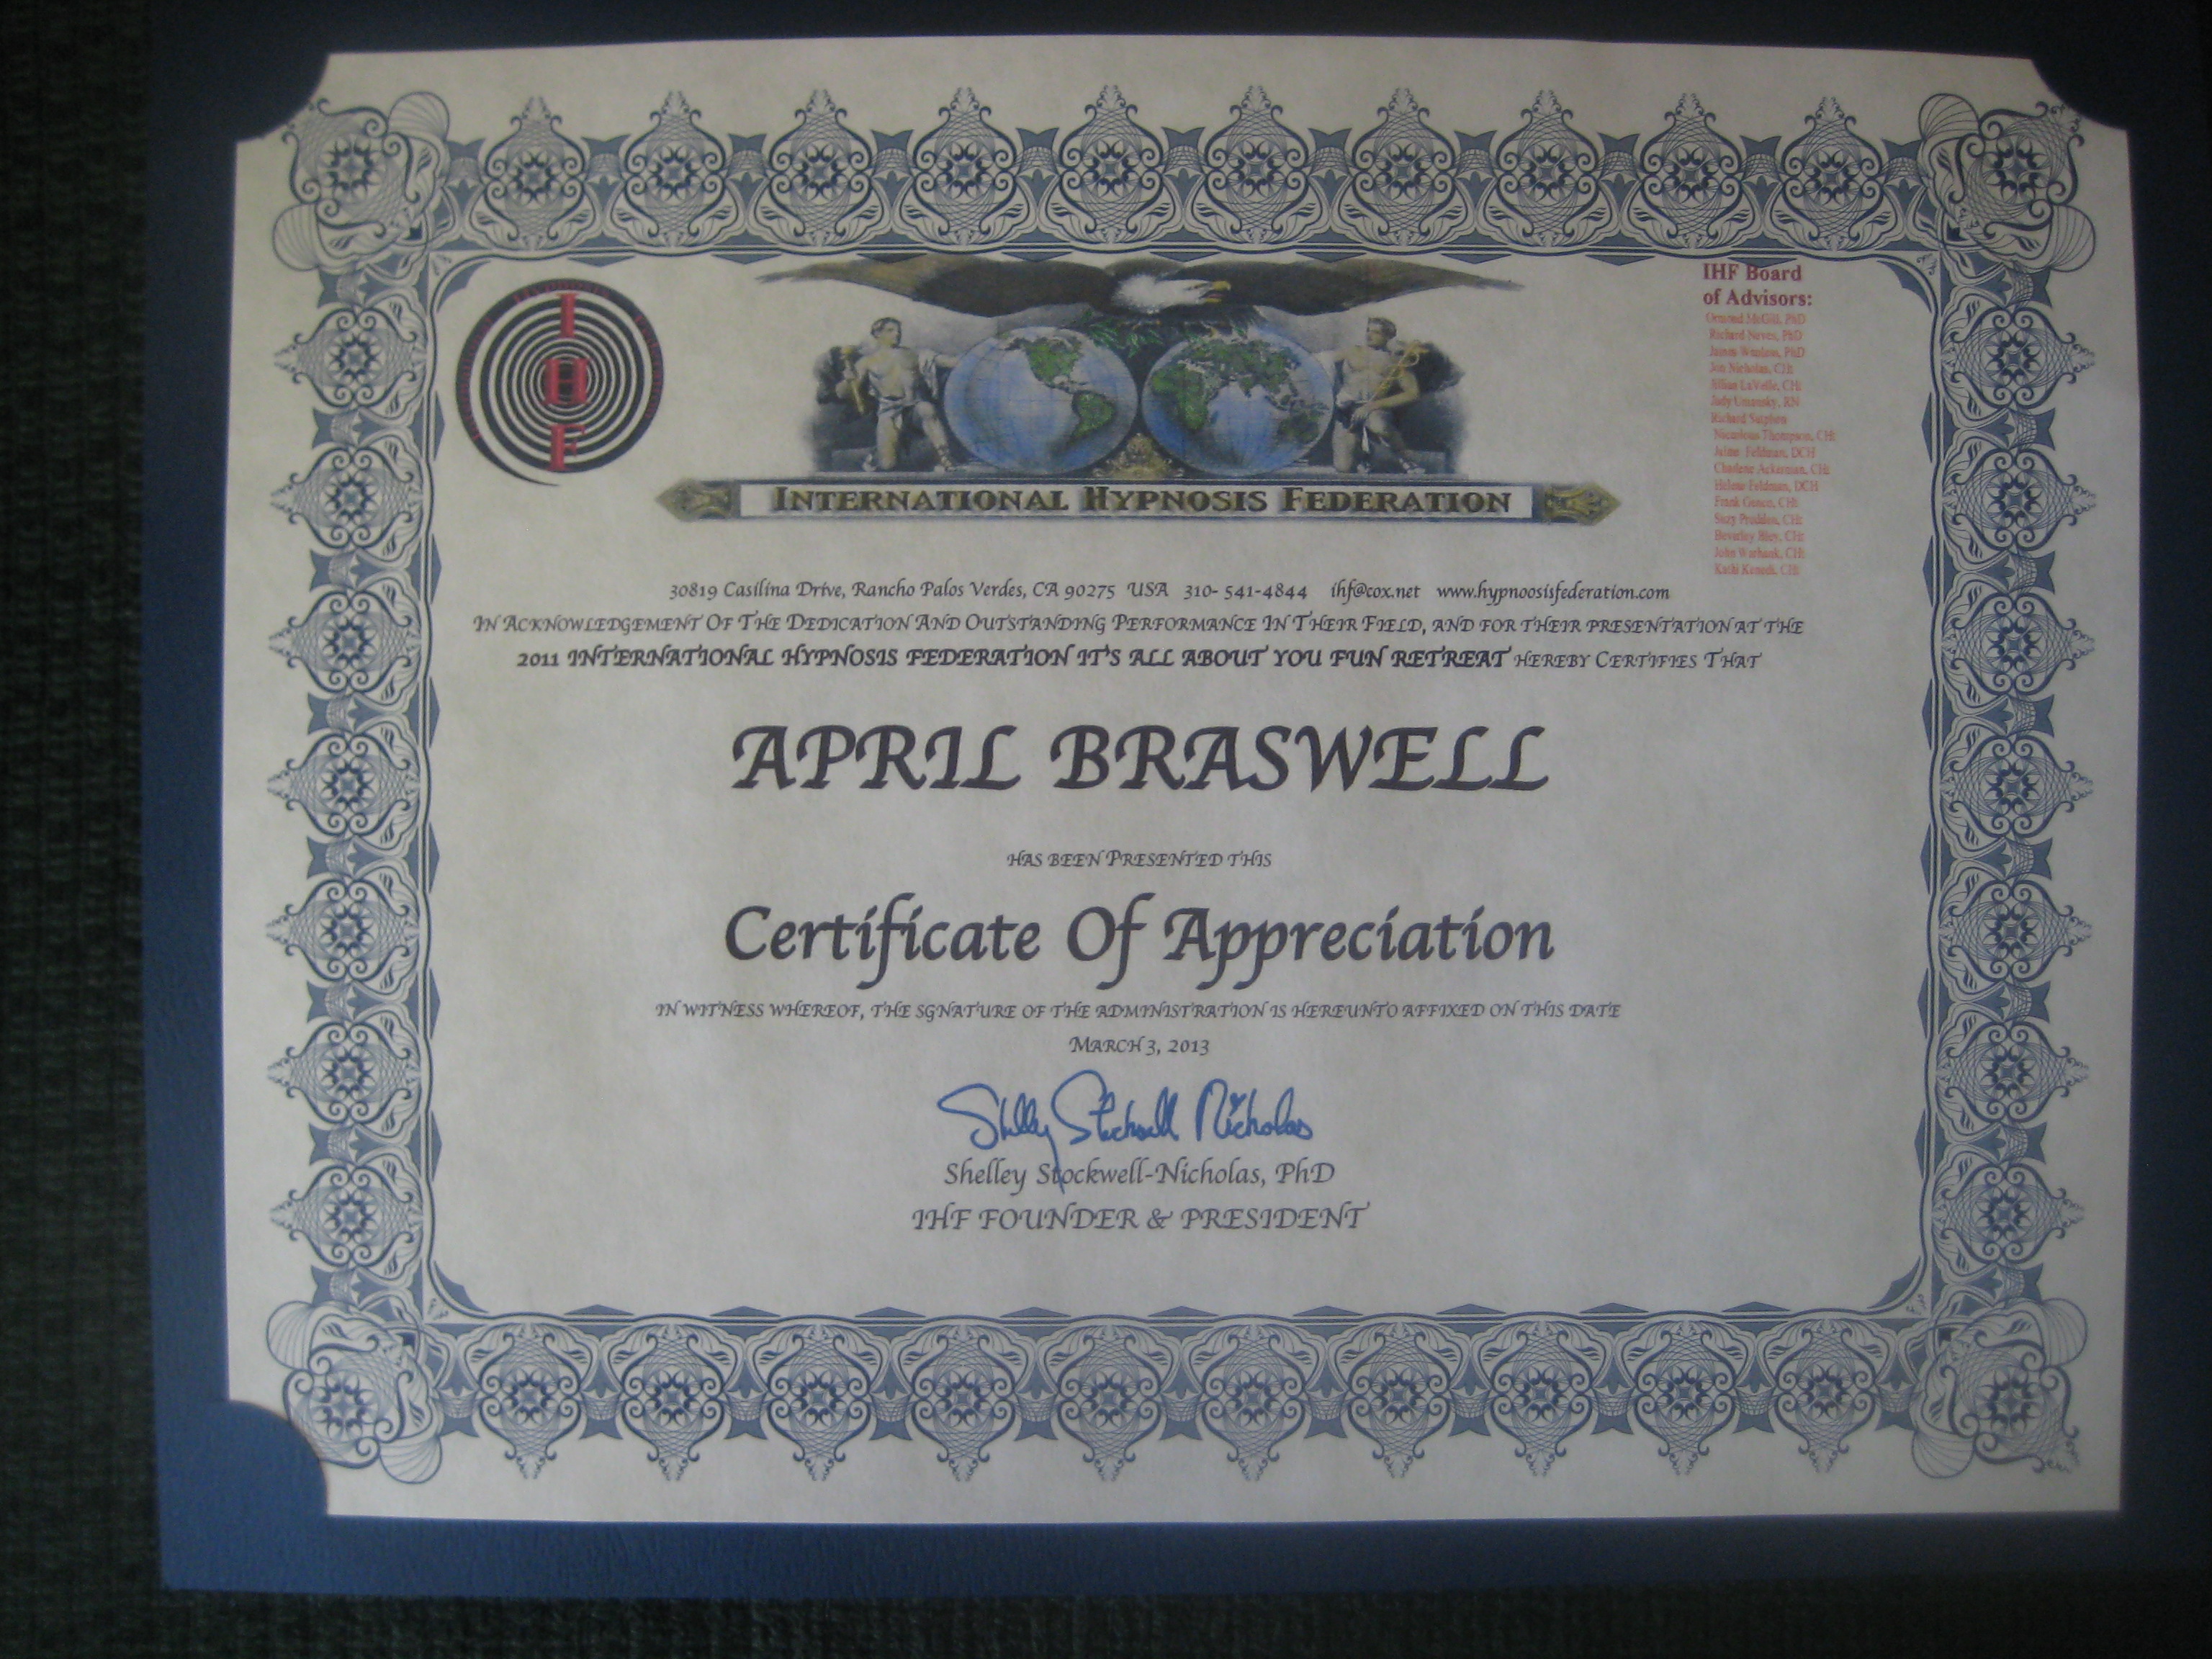 IHF certificate of hypnosis appreciation